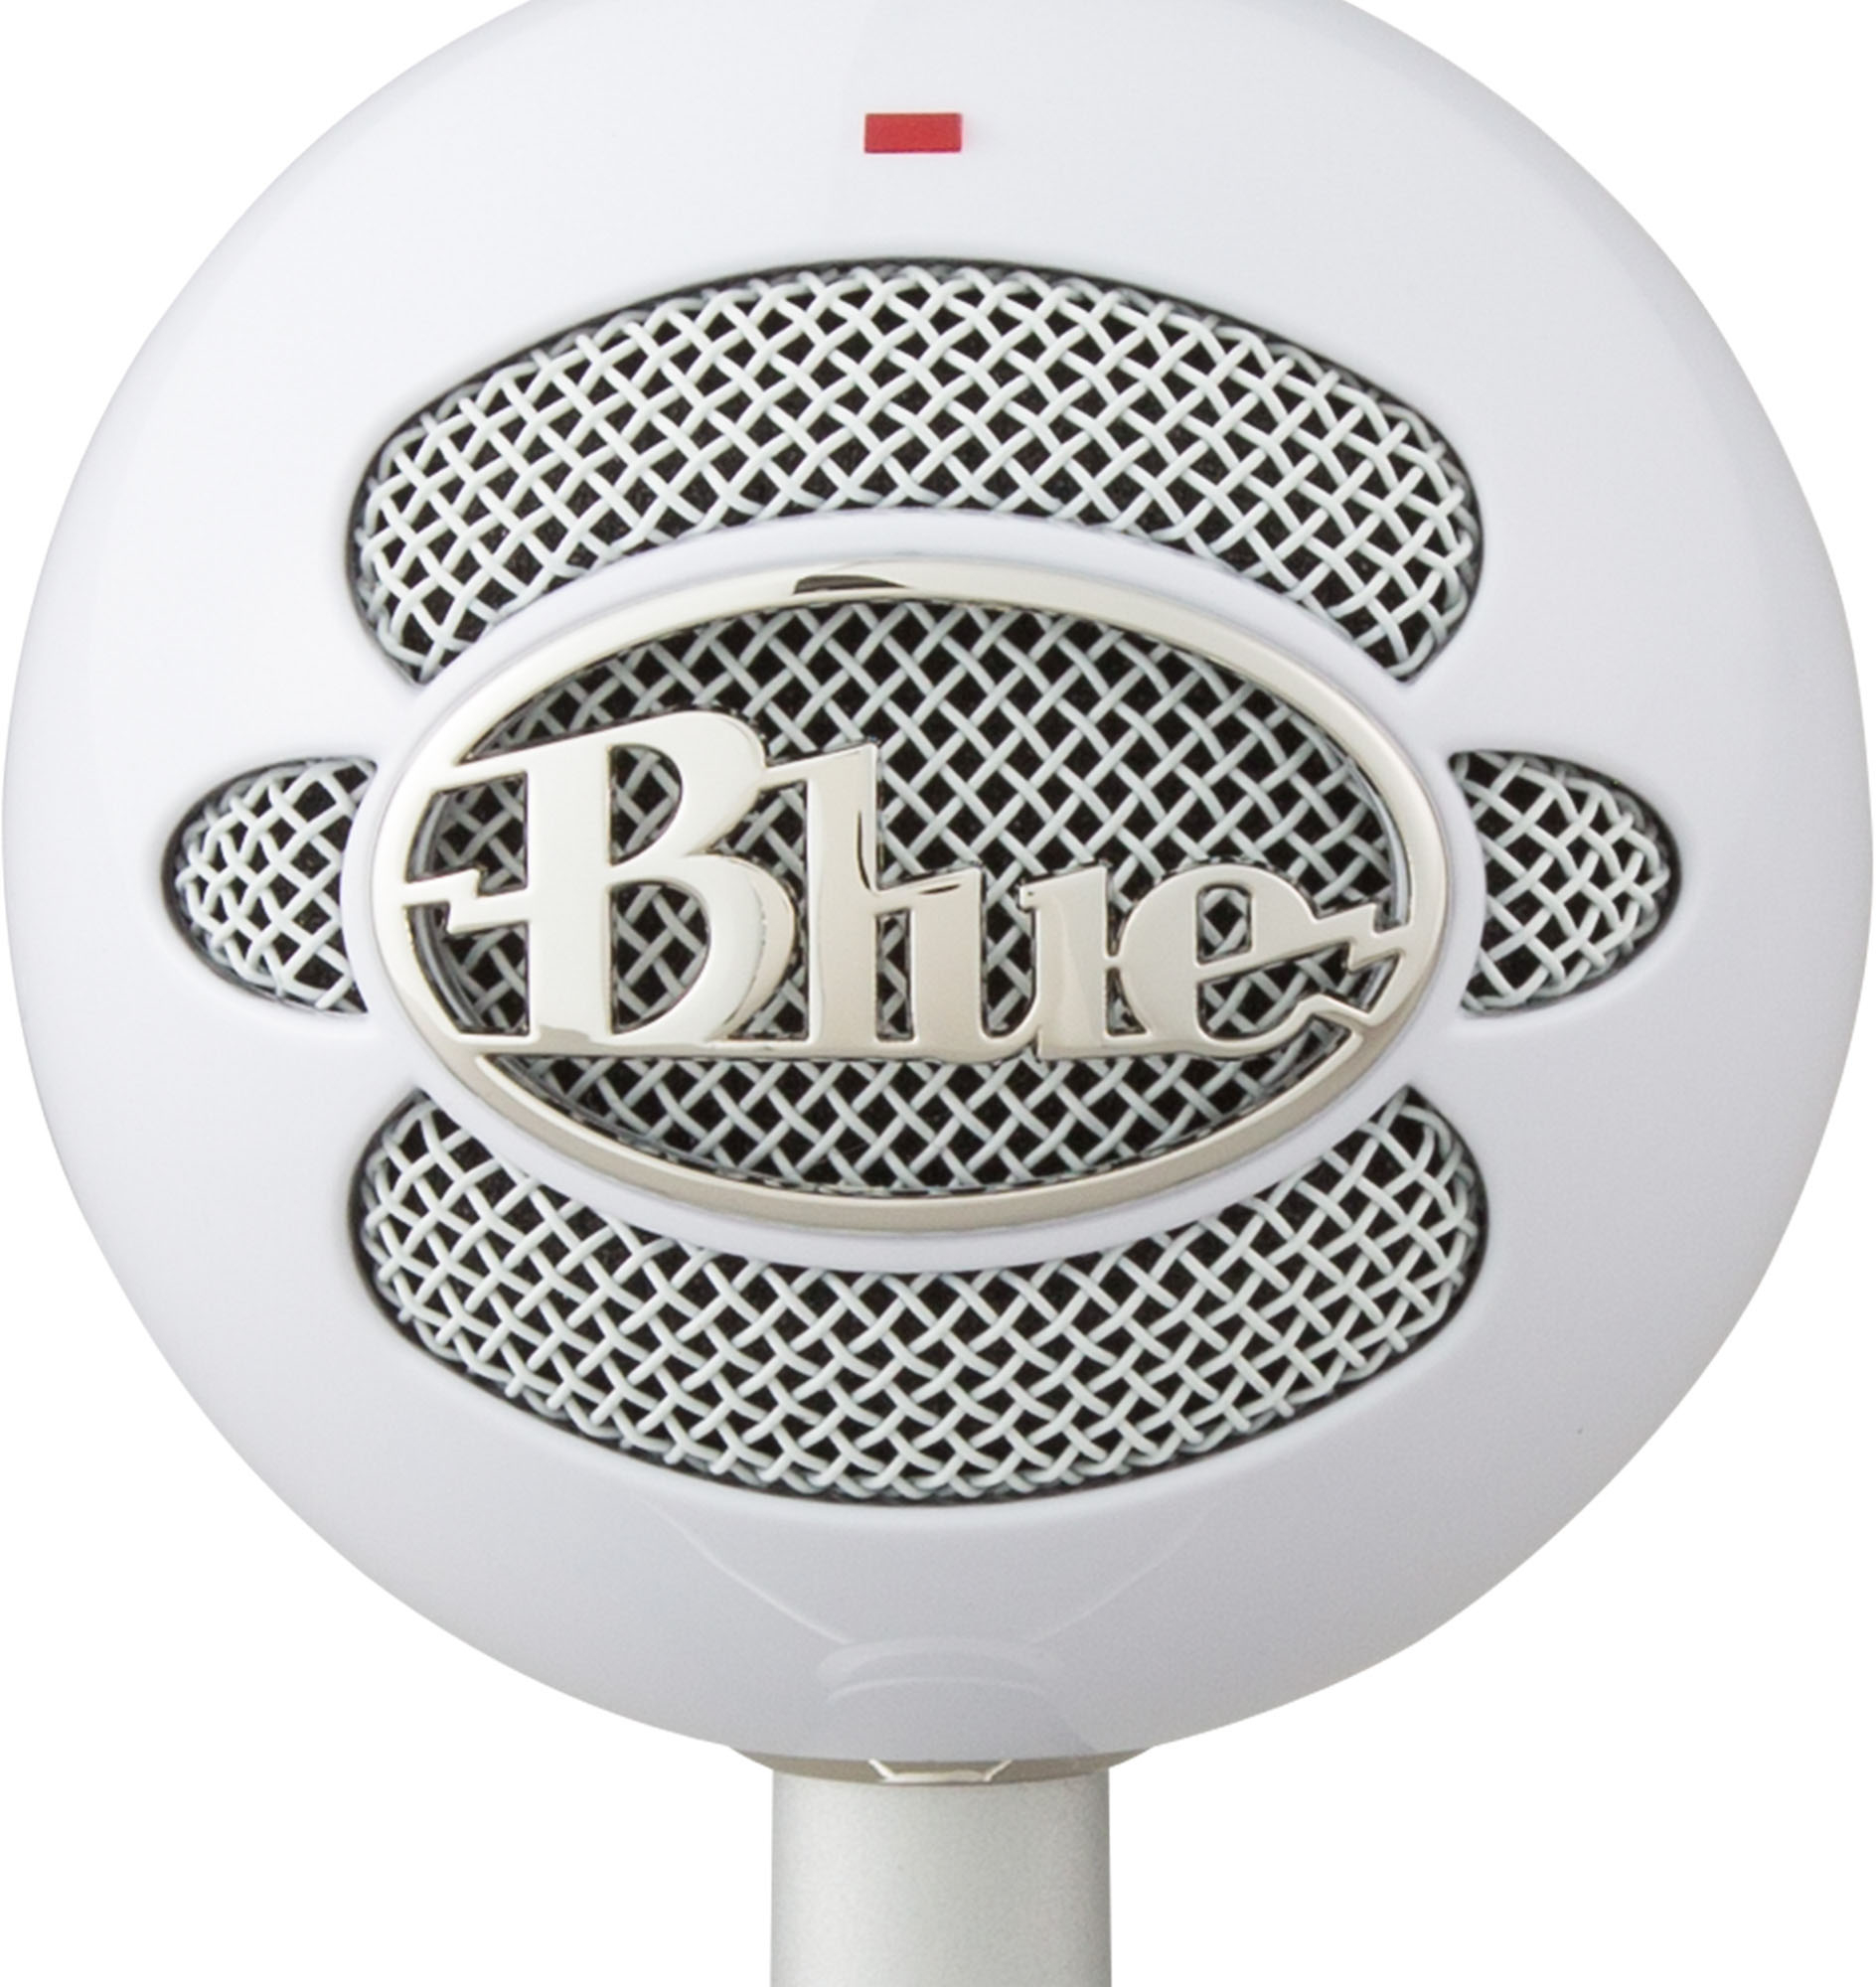  Blue Snowball iCE Mic (Black) Bundle with Shock Mount (2 Items)  : Musical Instruments